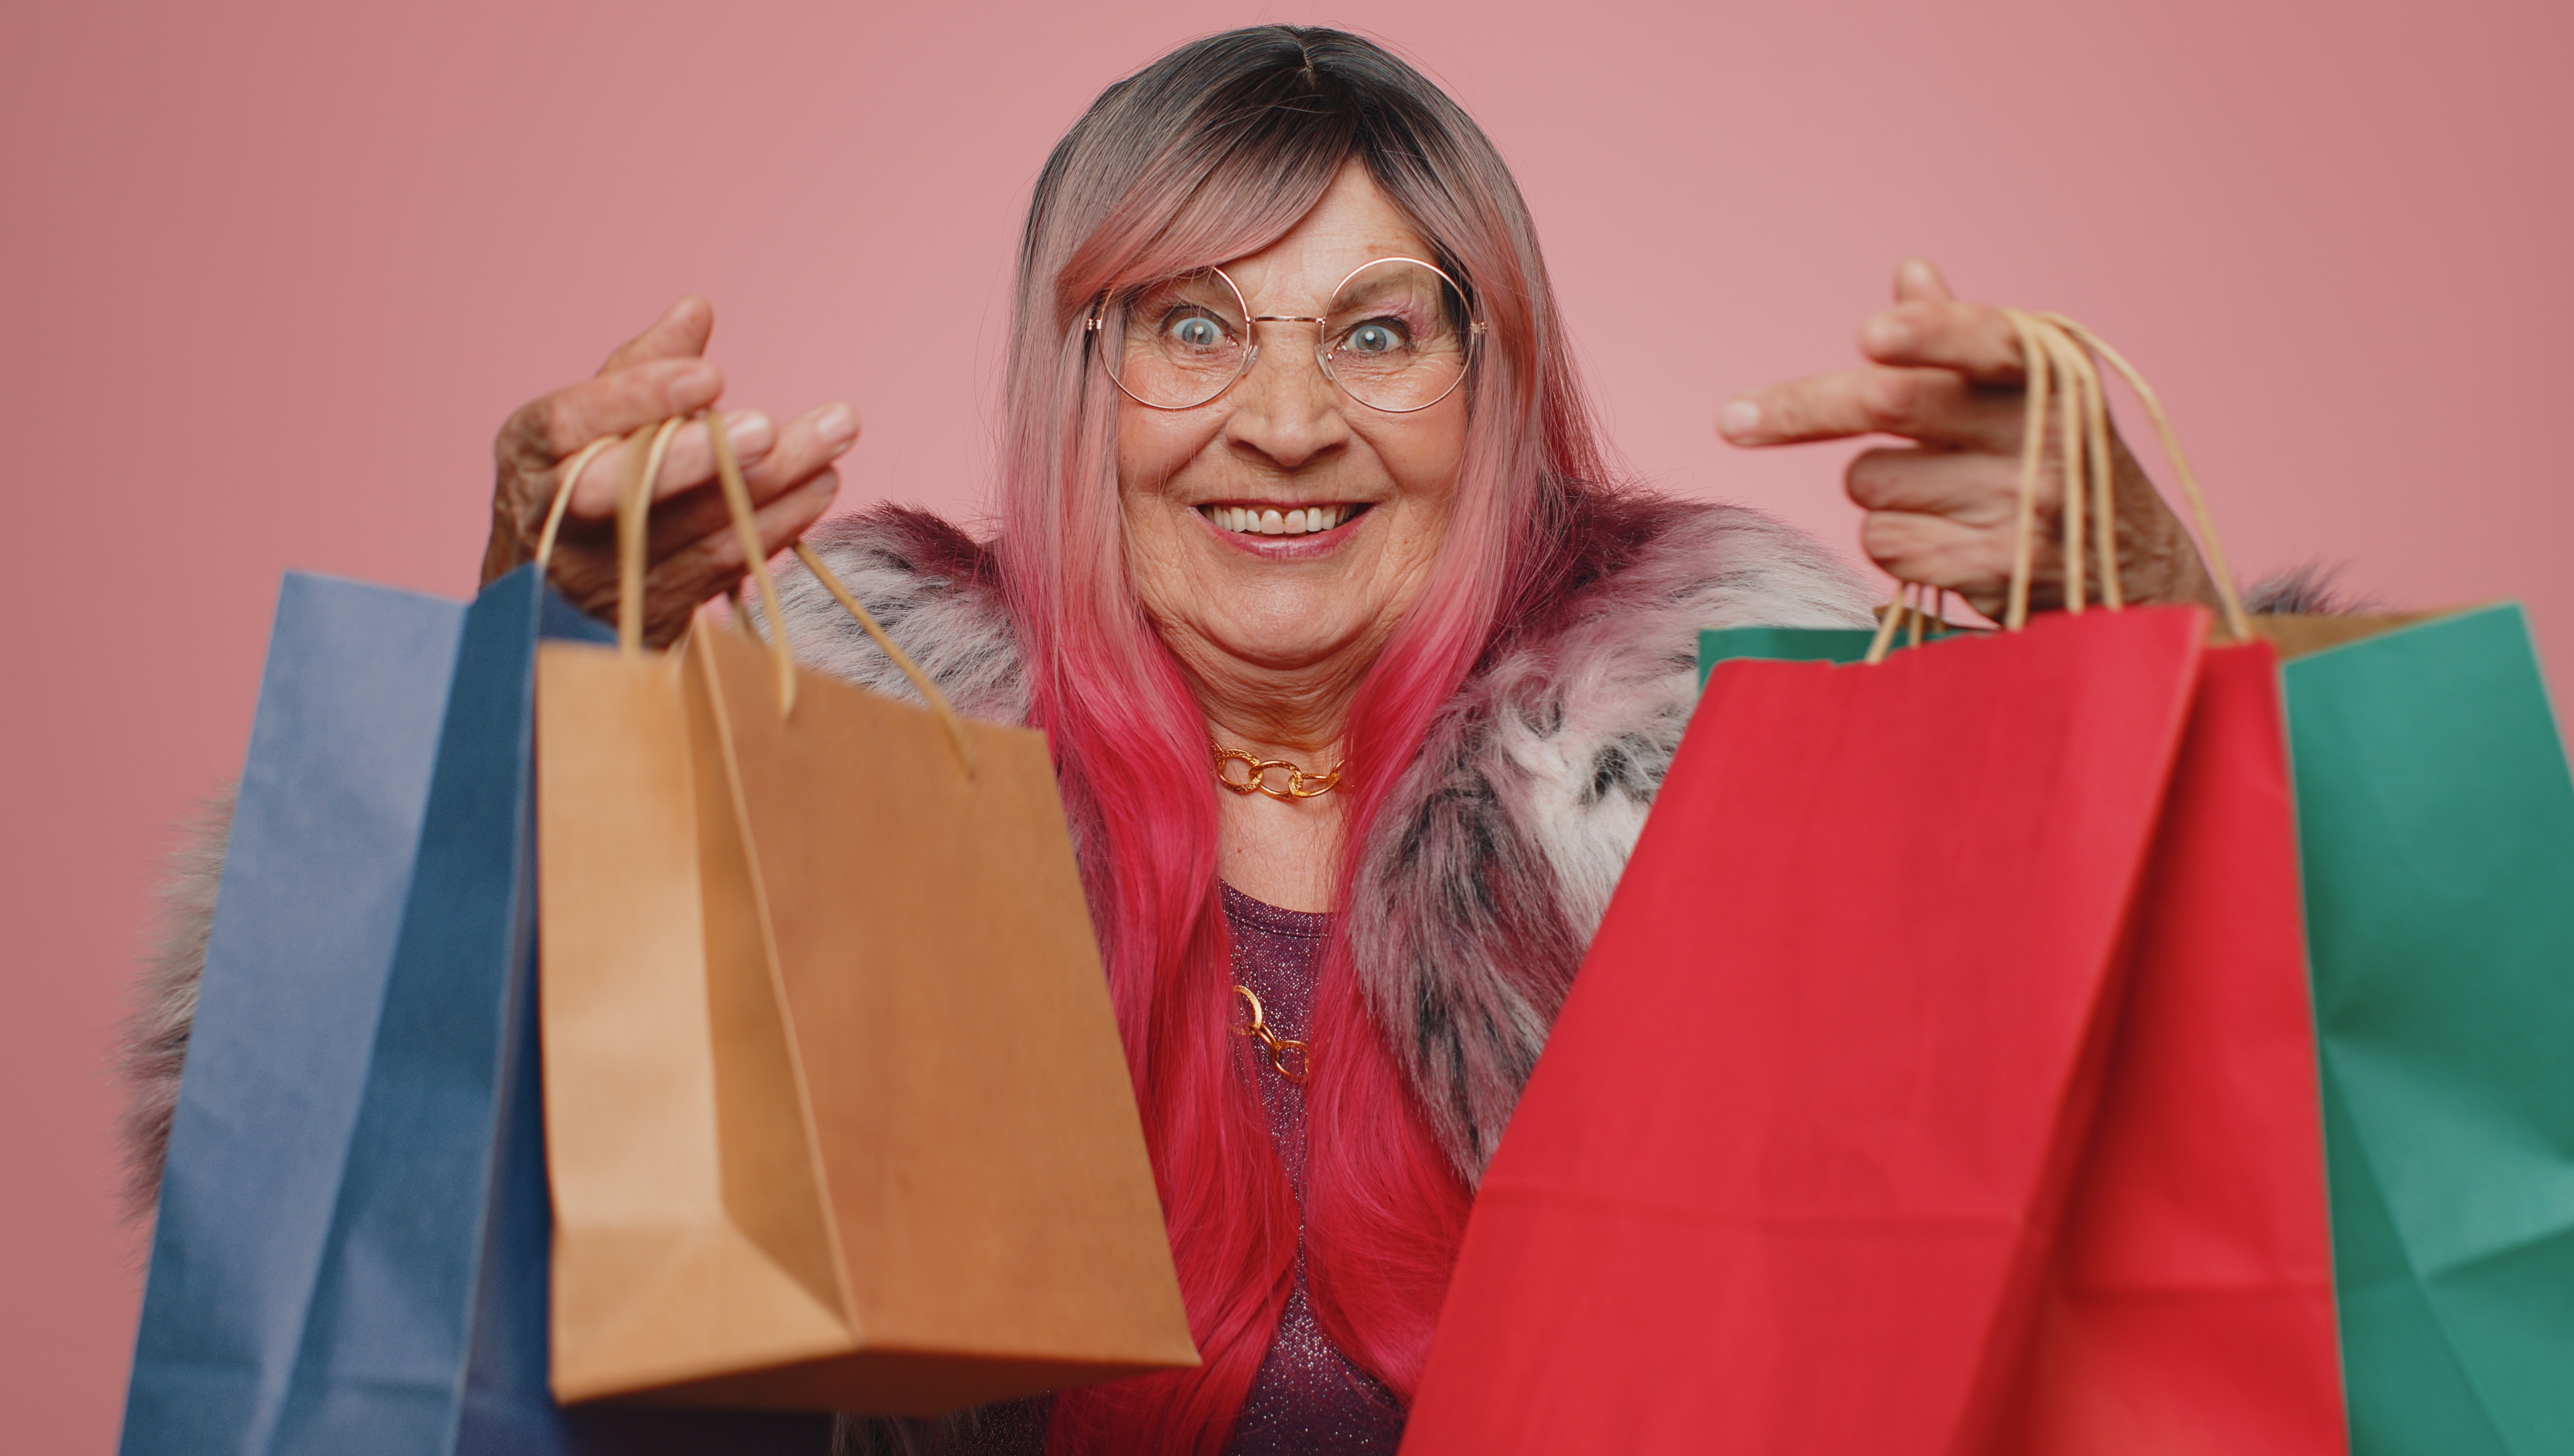 An elderly woman smiling while holding shopping bags | Source: Shutterstock